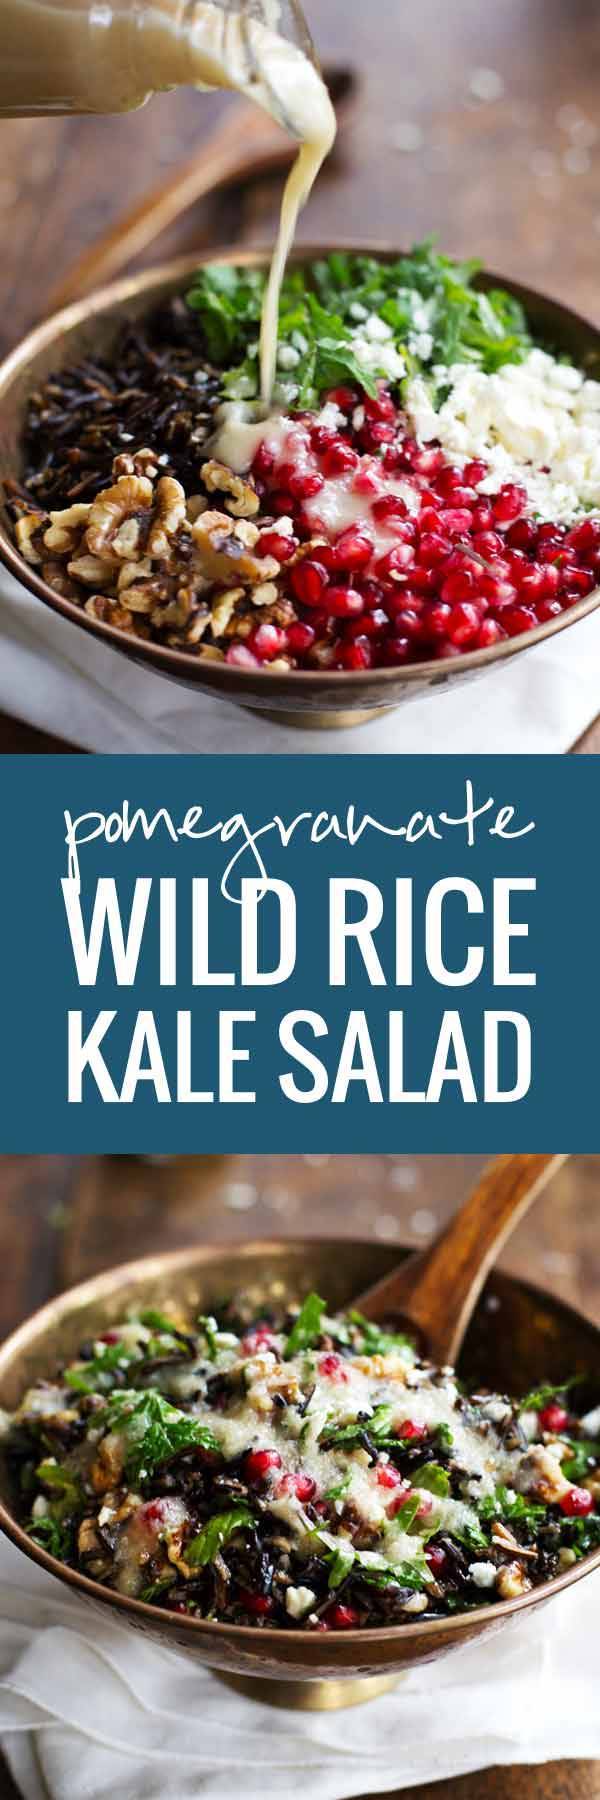 Pomegranate, Kale, and Wild Rice Salad with Walnuts and Feta - a perfect way to freshen up the table! | pinchofyum.com